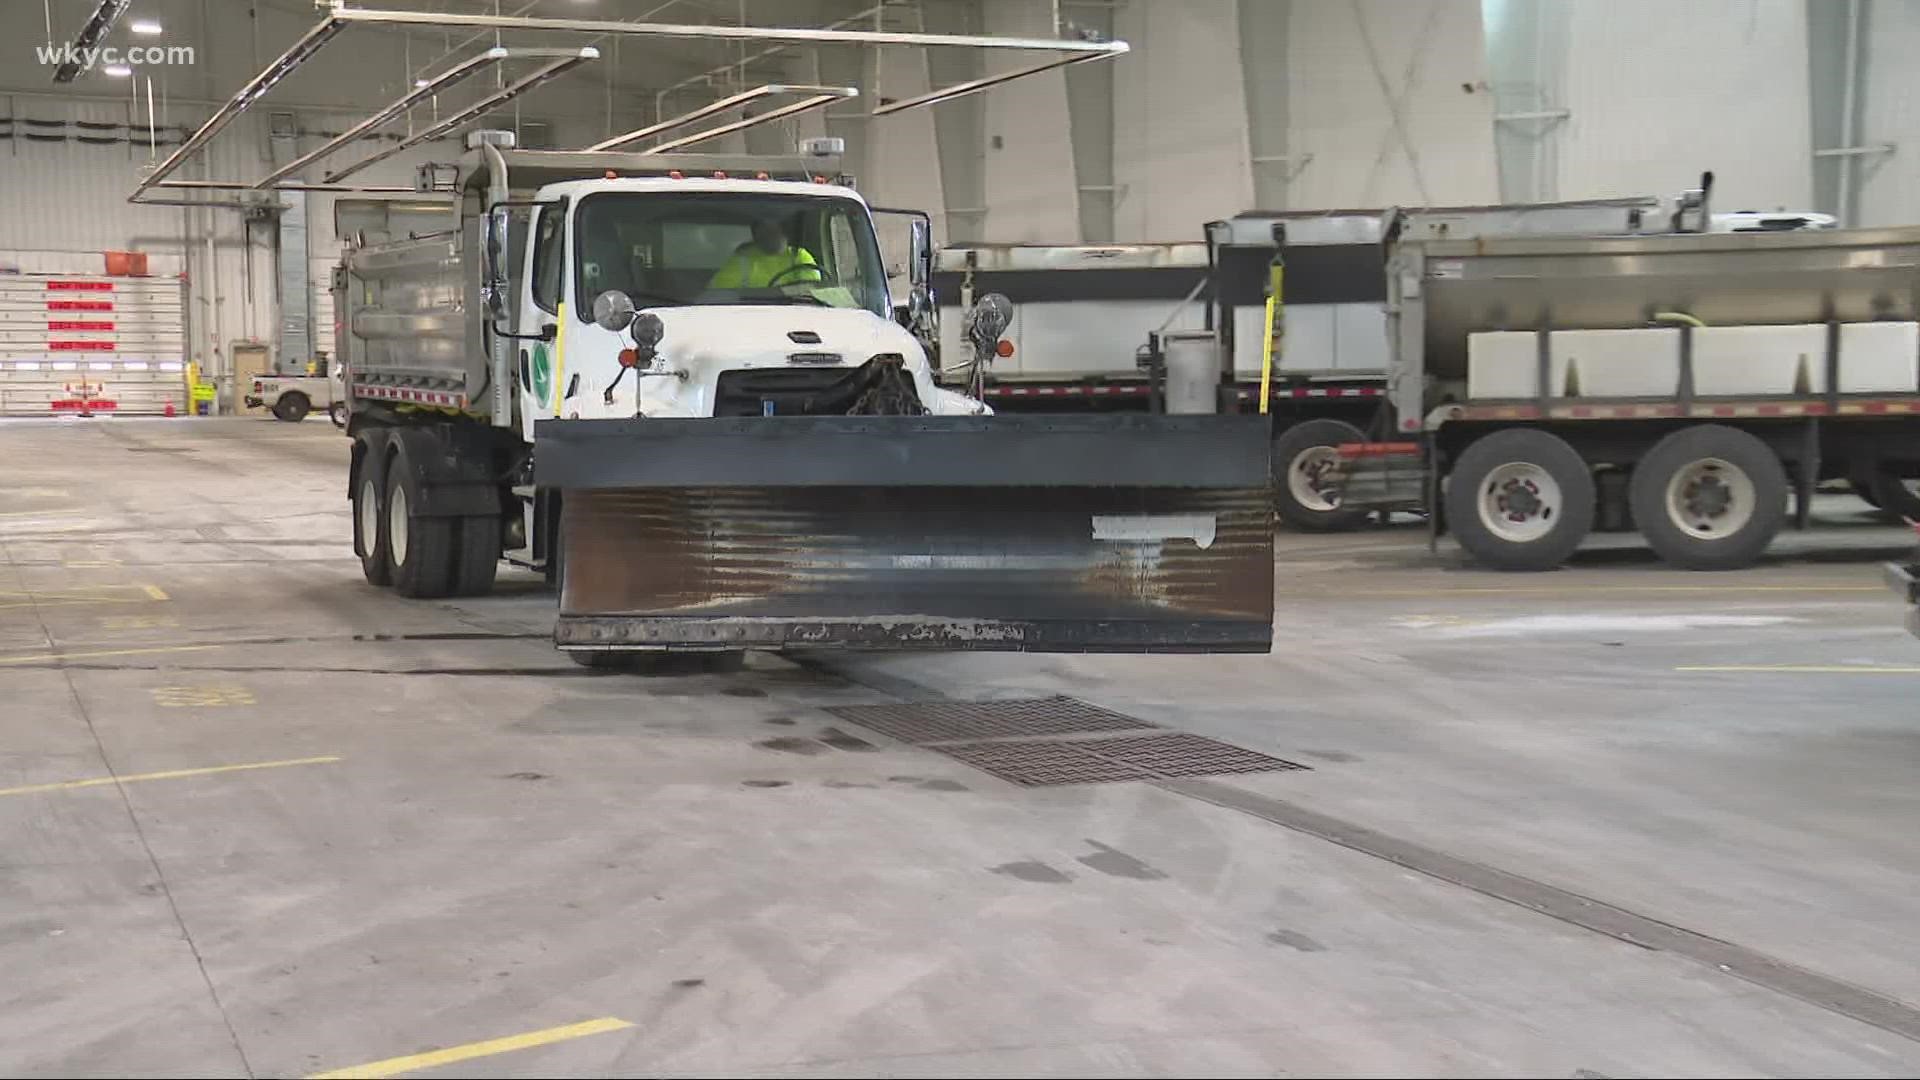 After a day of wind and cold, the snow is coming.
And road crews say they are ready.